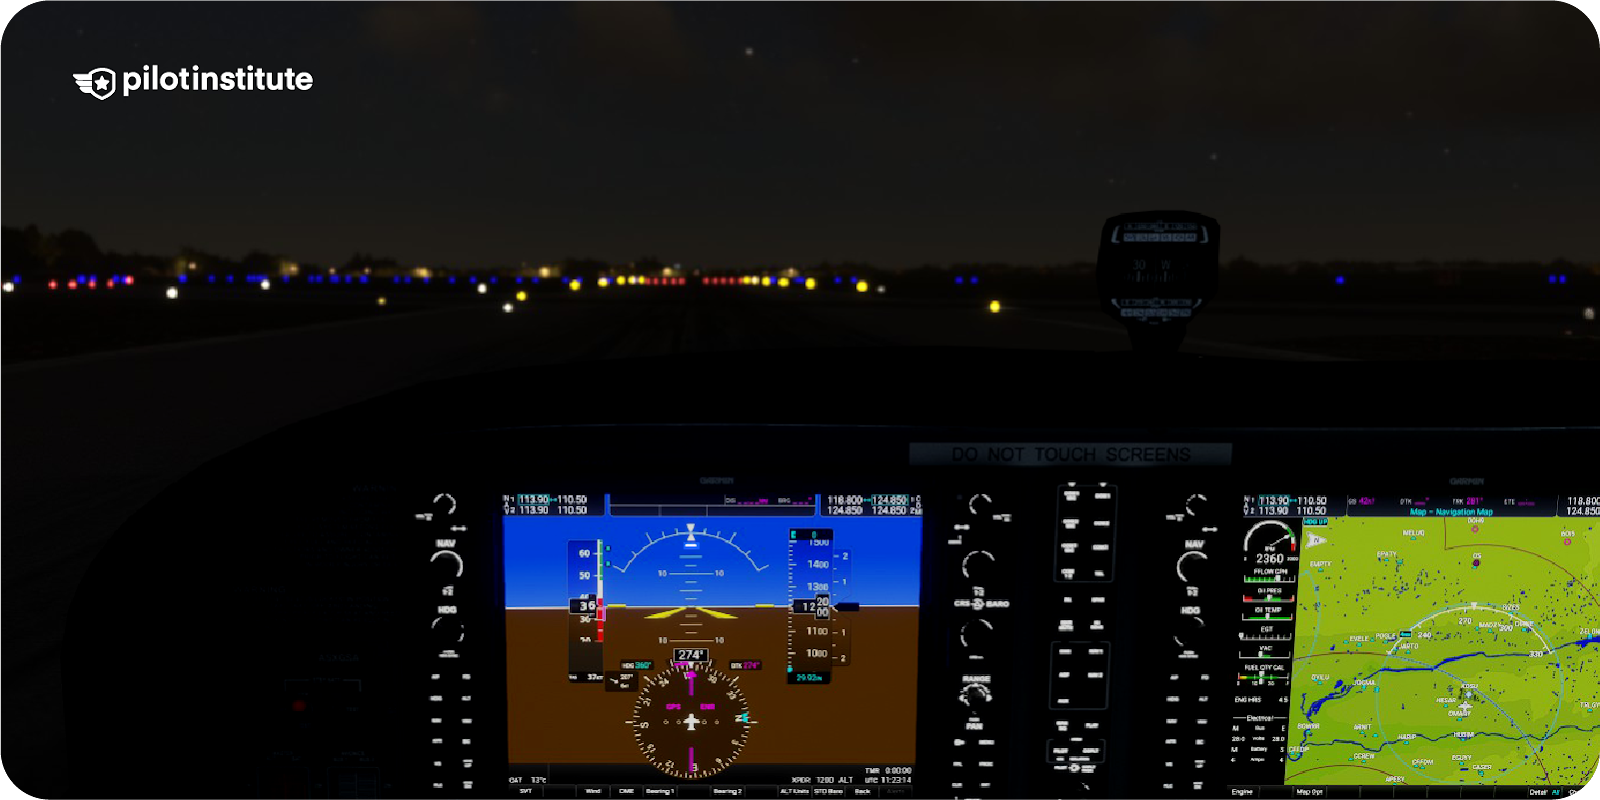 Cessna cockpit showing long takeoff roll with the end of the runway approaching.